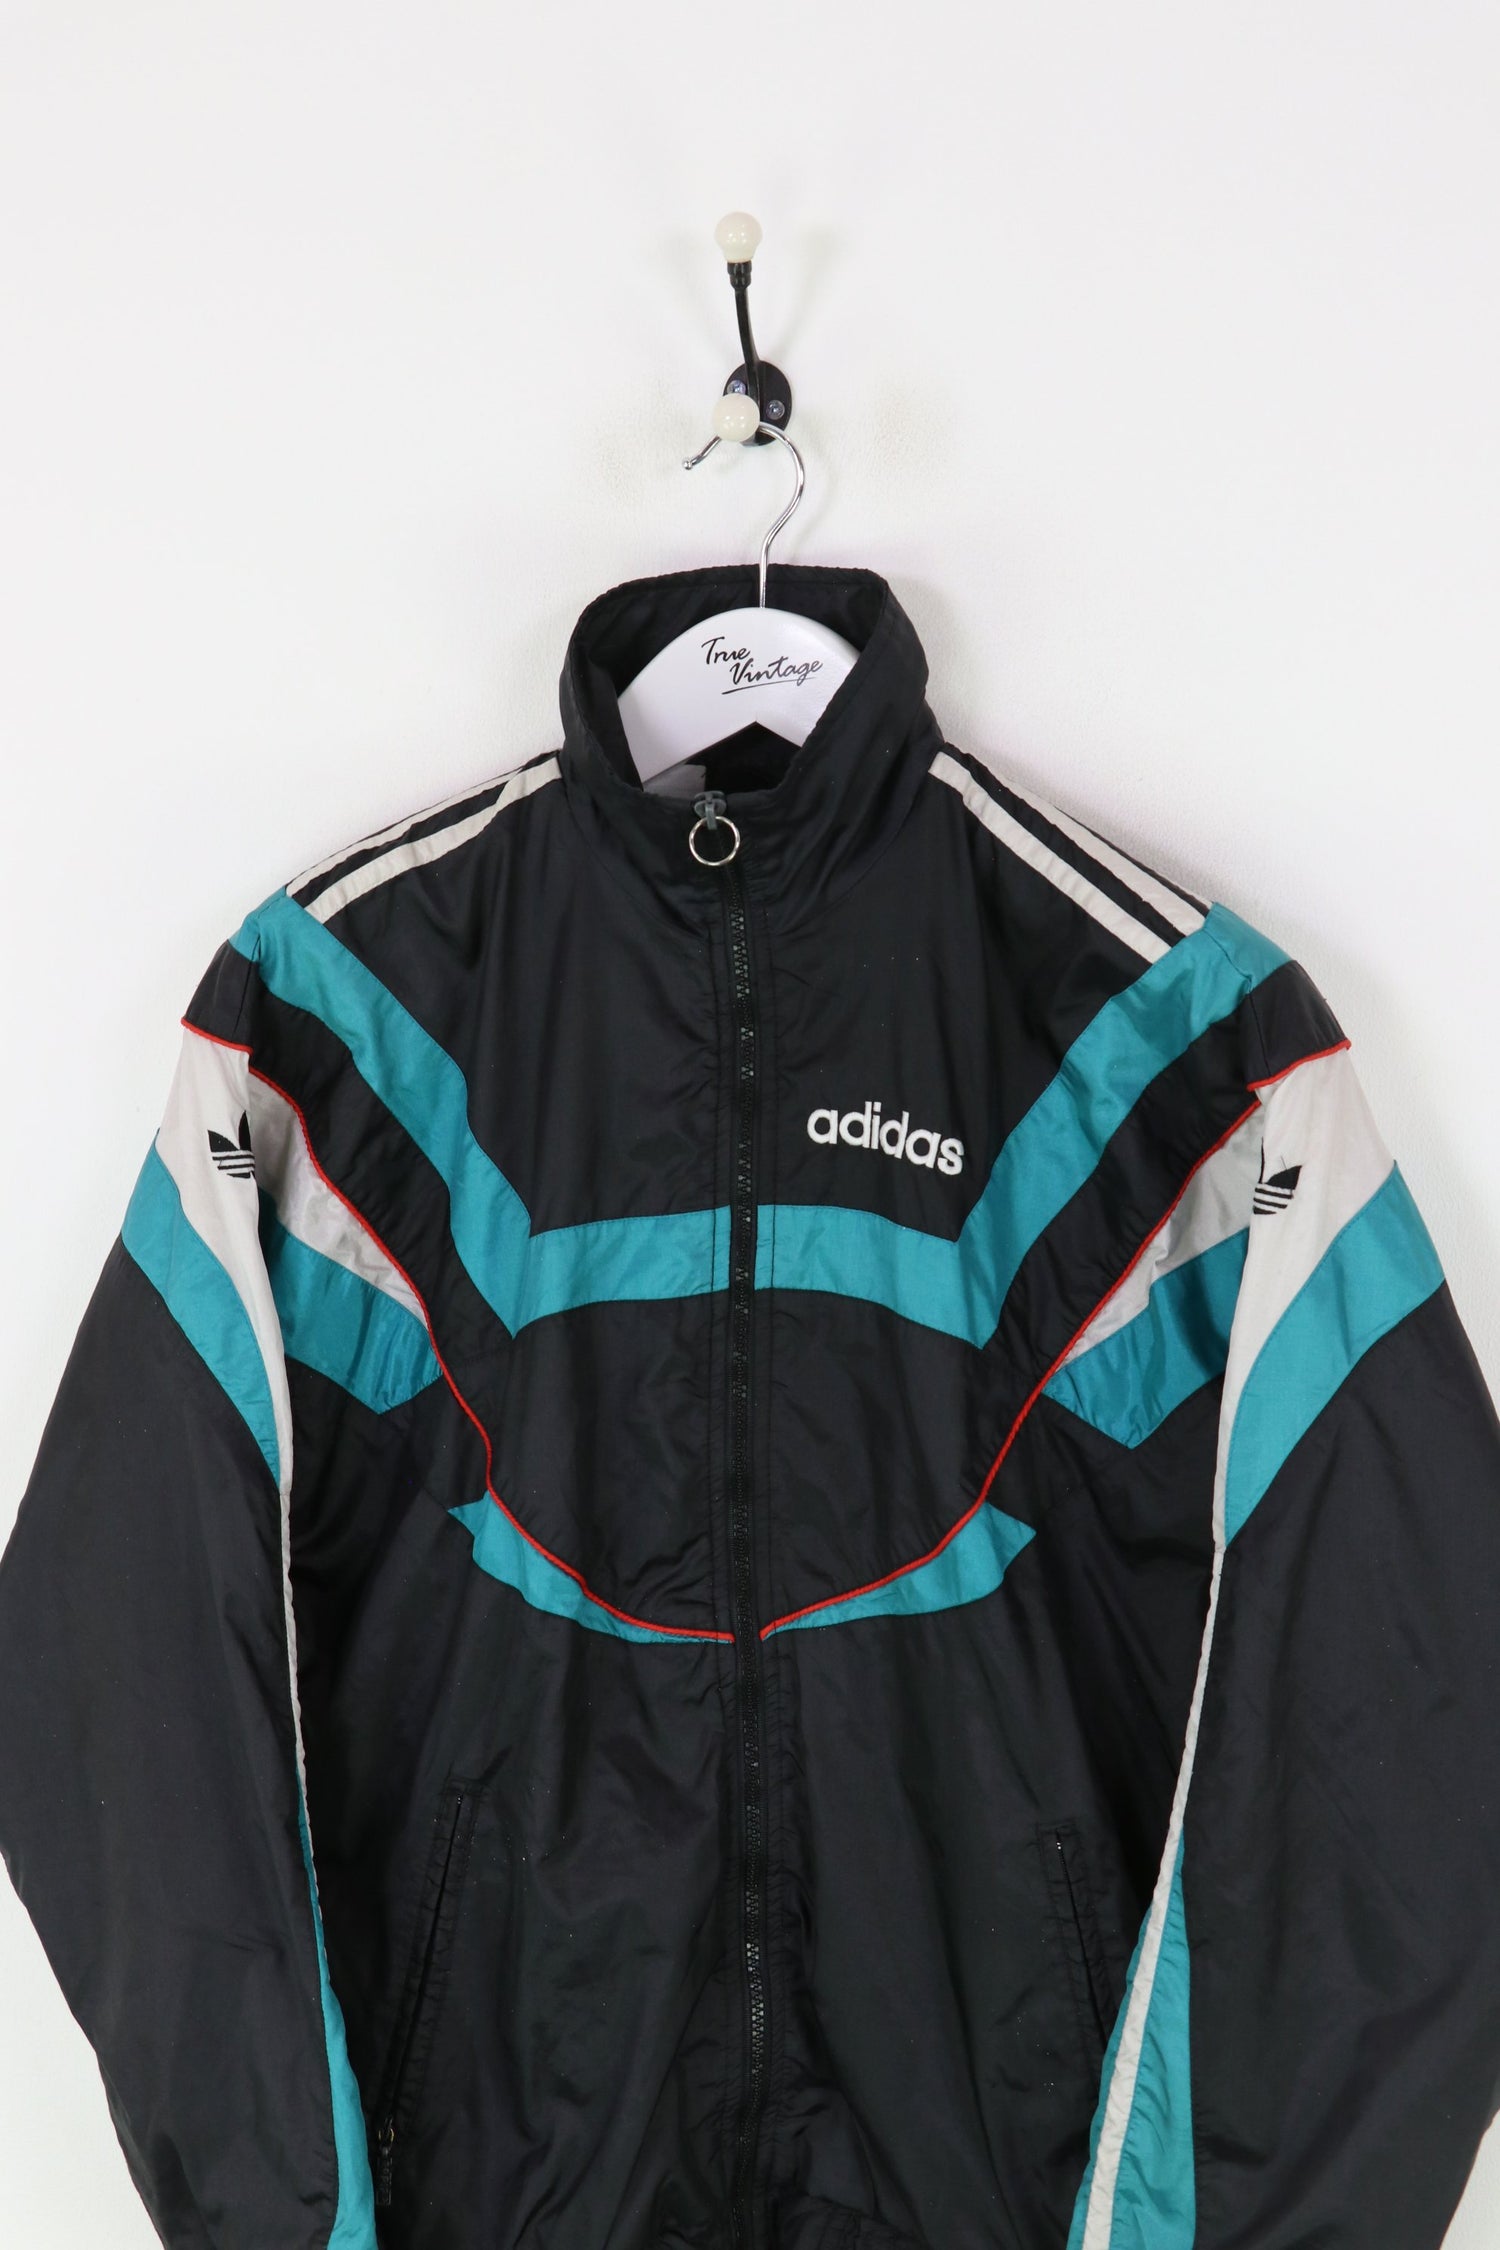 Adidas Shell Suit Jacket Black Small